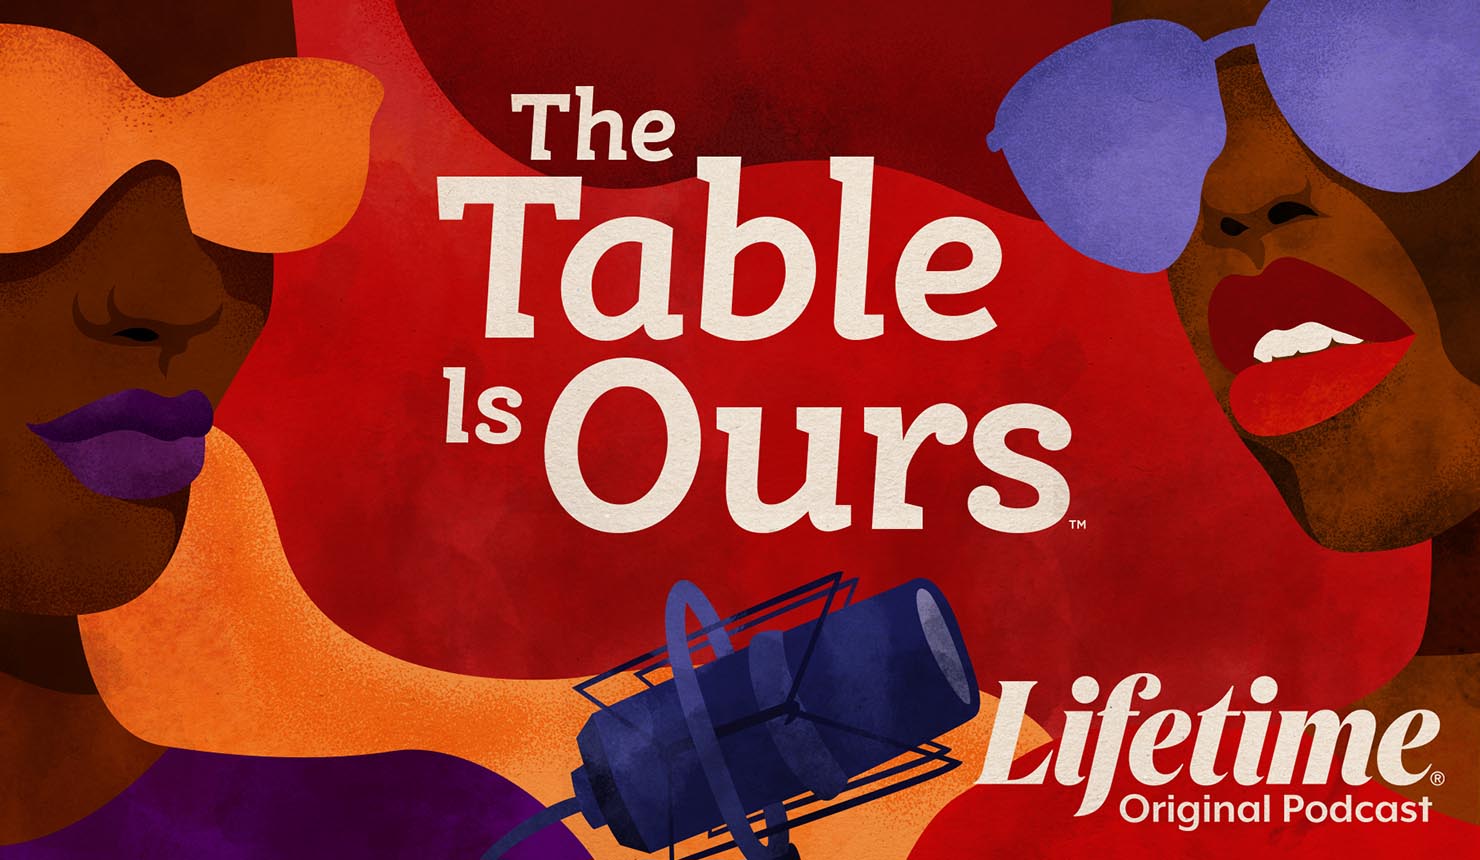 The promotional art for The Table is Our Podcast shows an illustration of two women's faces, wearing sunglasses, facing each other with a microphone between them.